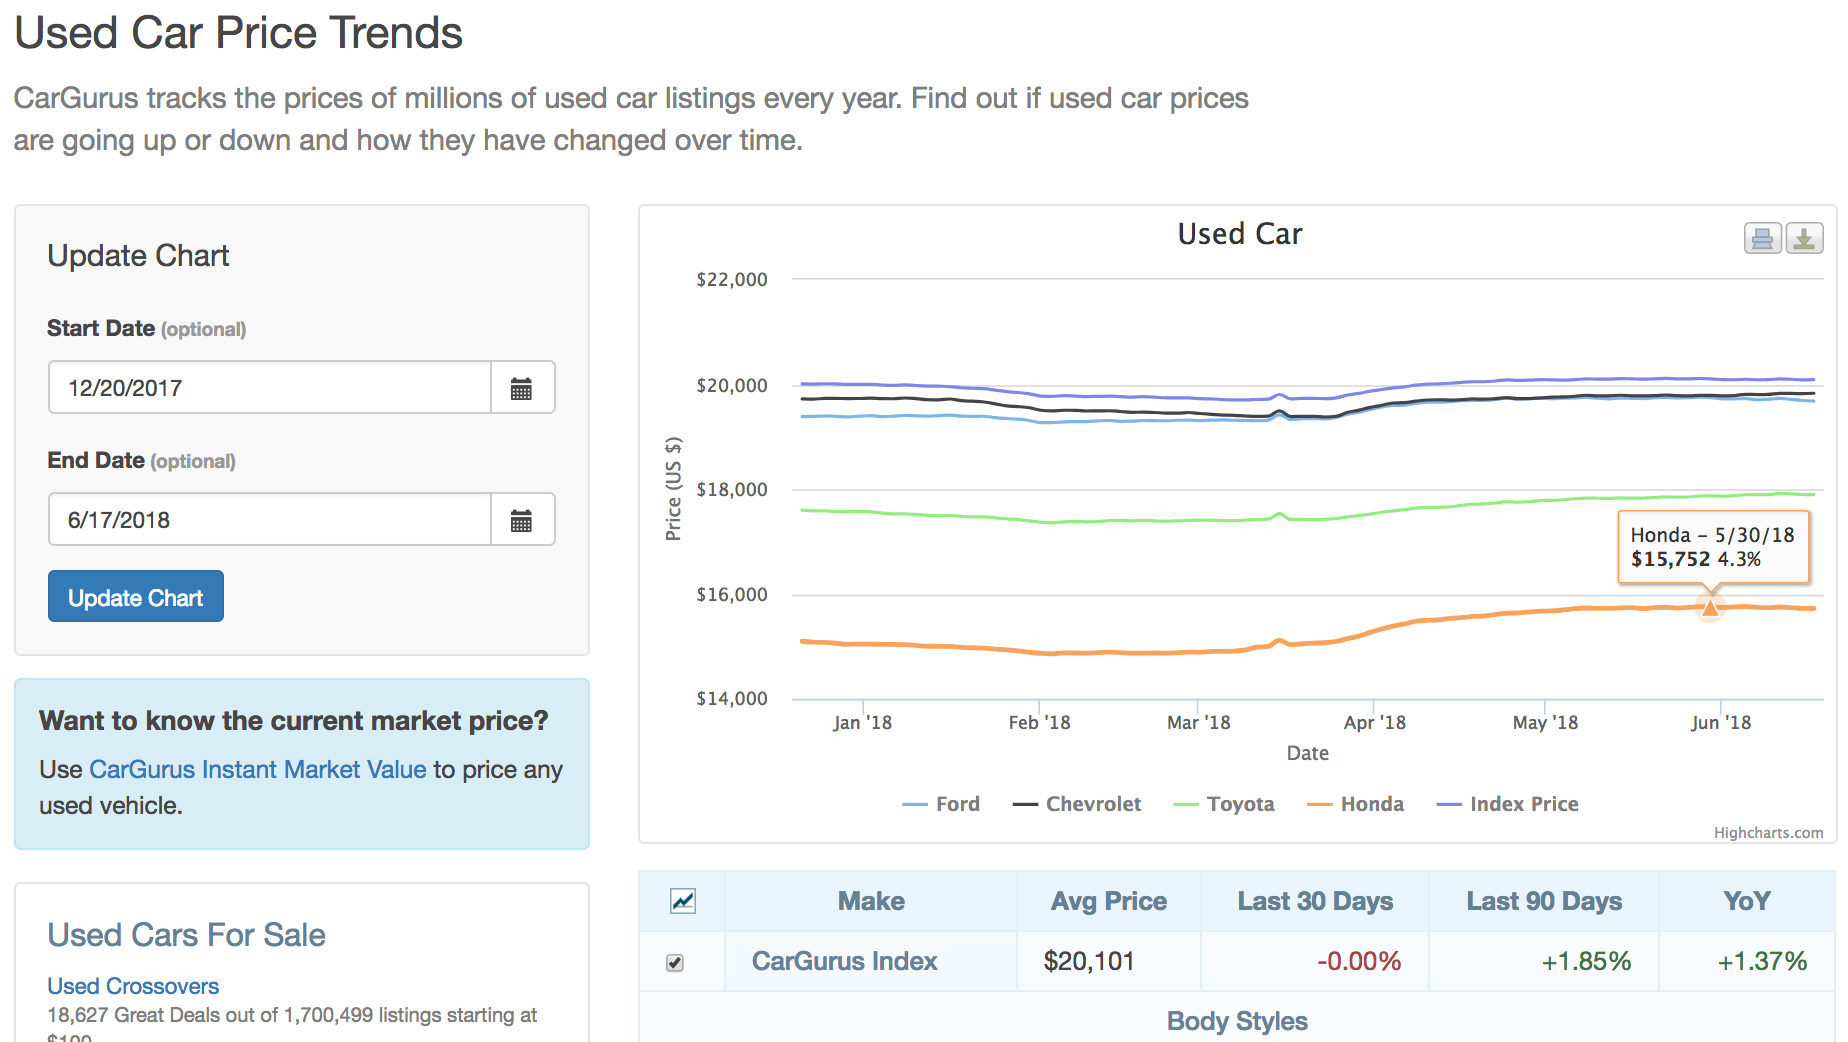 See how used car prices change over time with CarGurus' Price Trends.